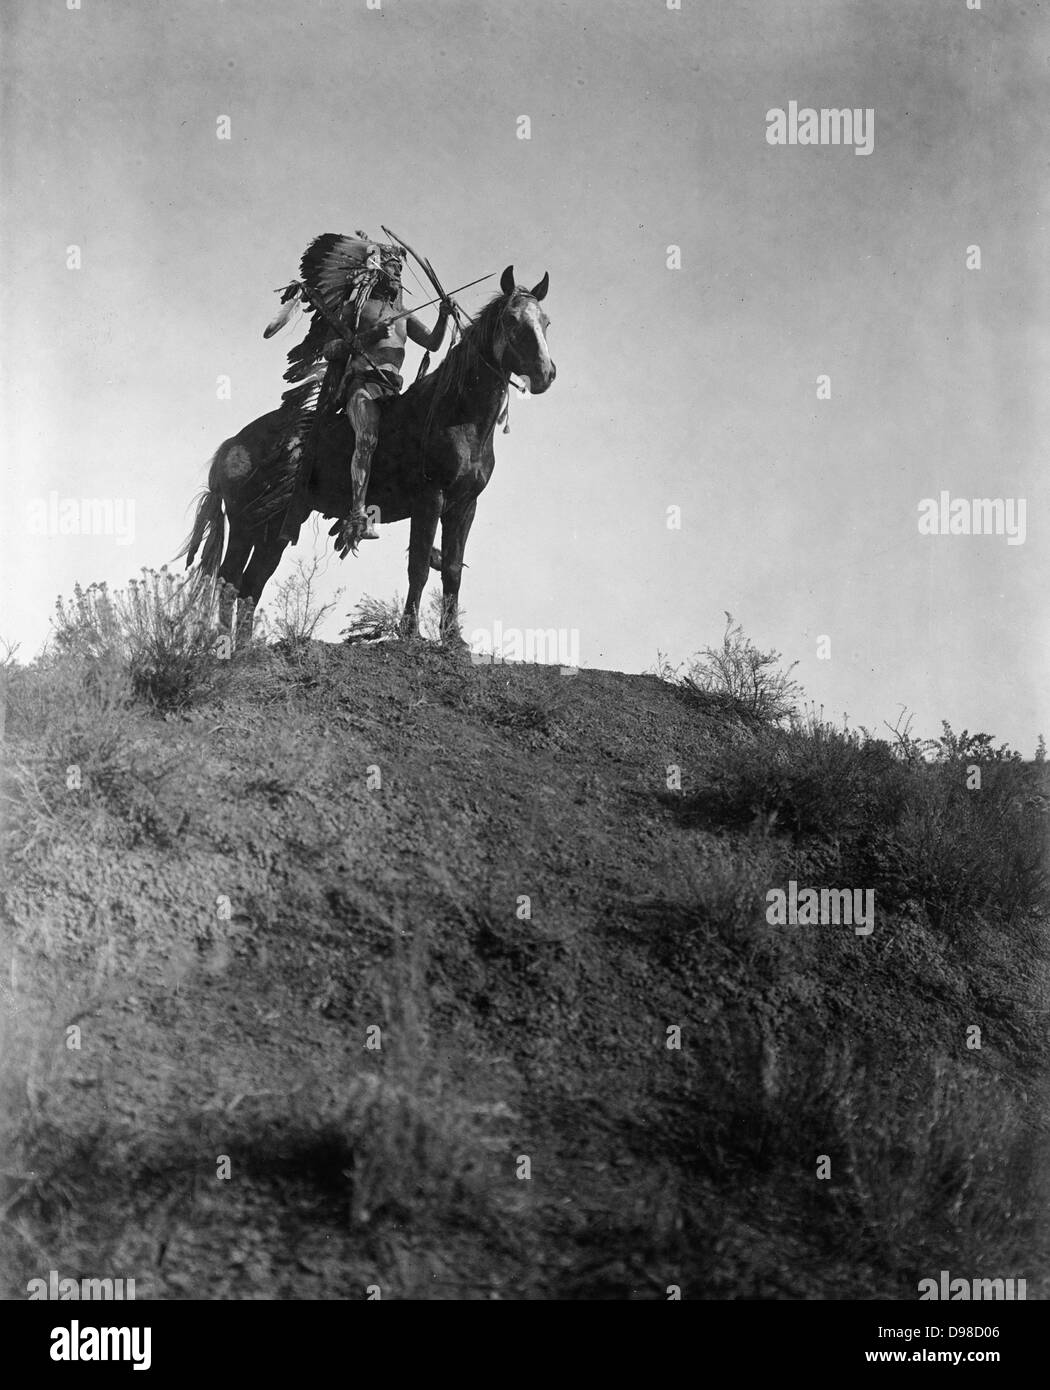 Native American Indian man in feather headdress, on horseback, holding bow and arrows, 1 arrow in his mouth, 1908. Photograph by Edward Curtis (1868-1952). Stock Photo